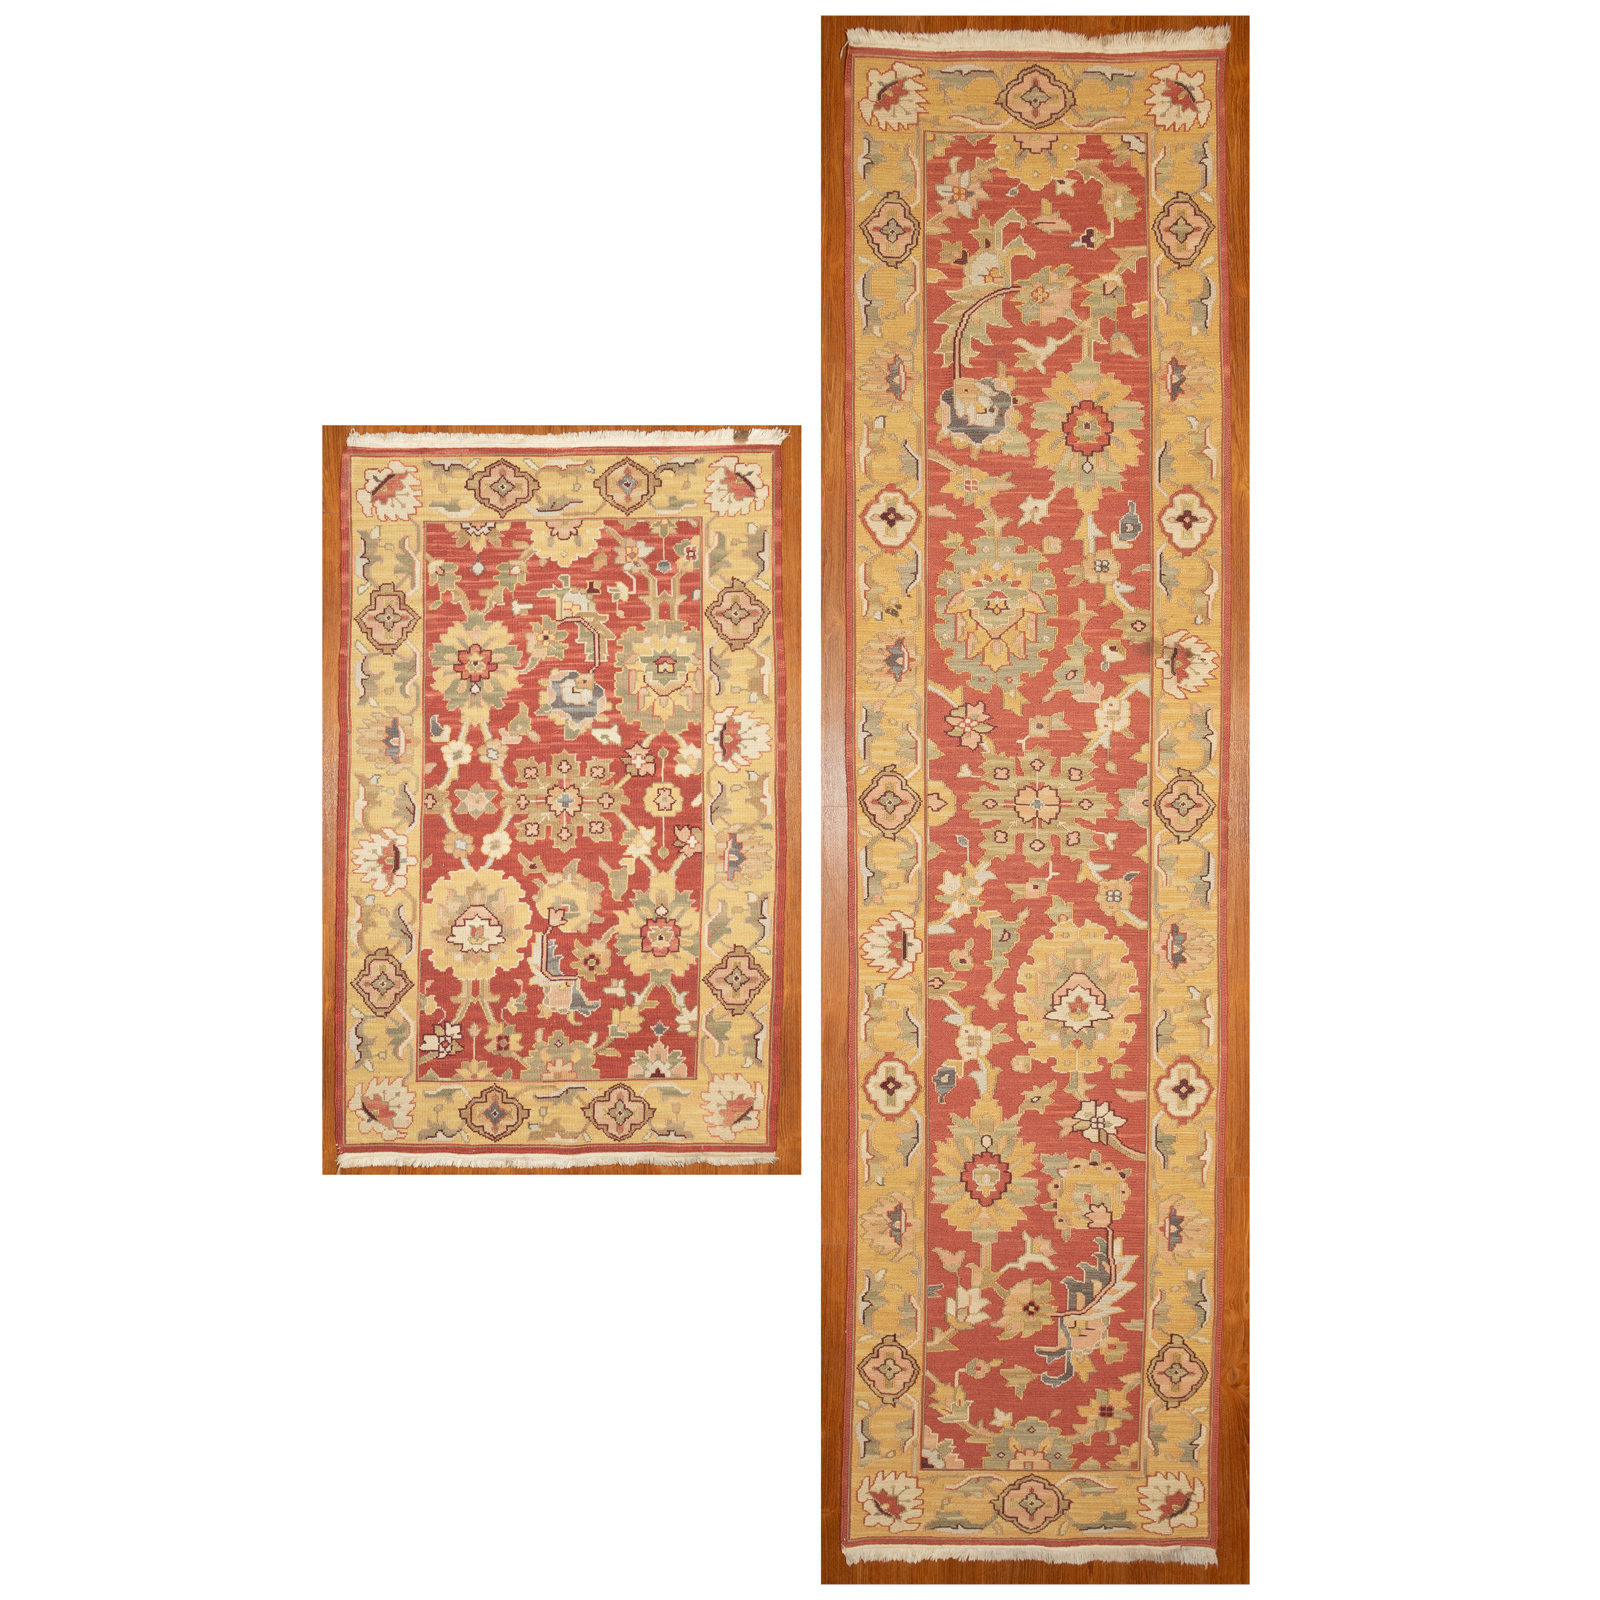 A PAIR OF NOURMAK RUGS CHINA  2e90d3